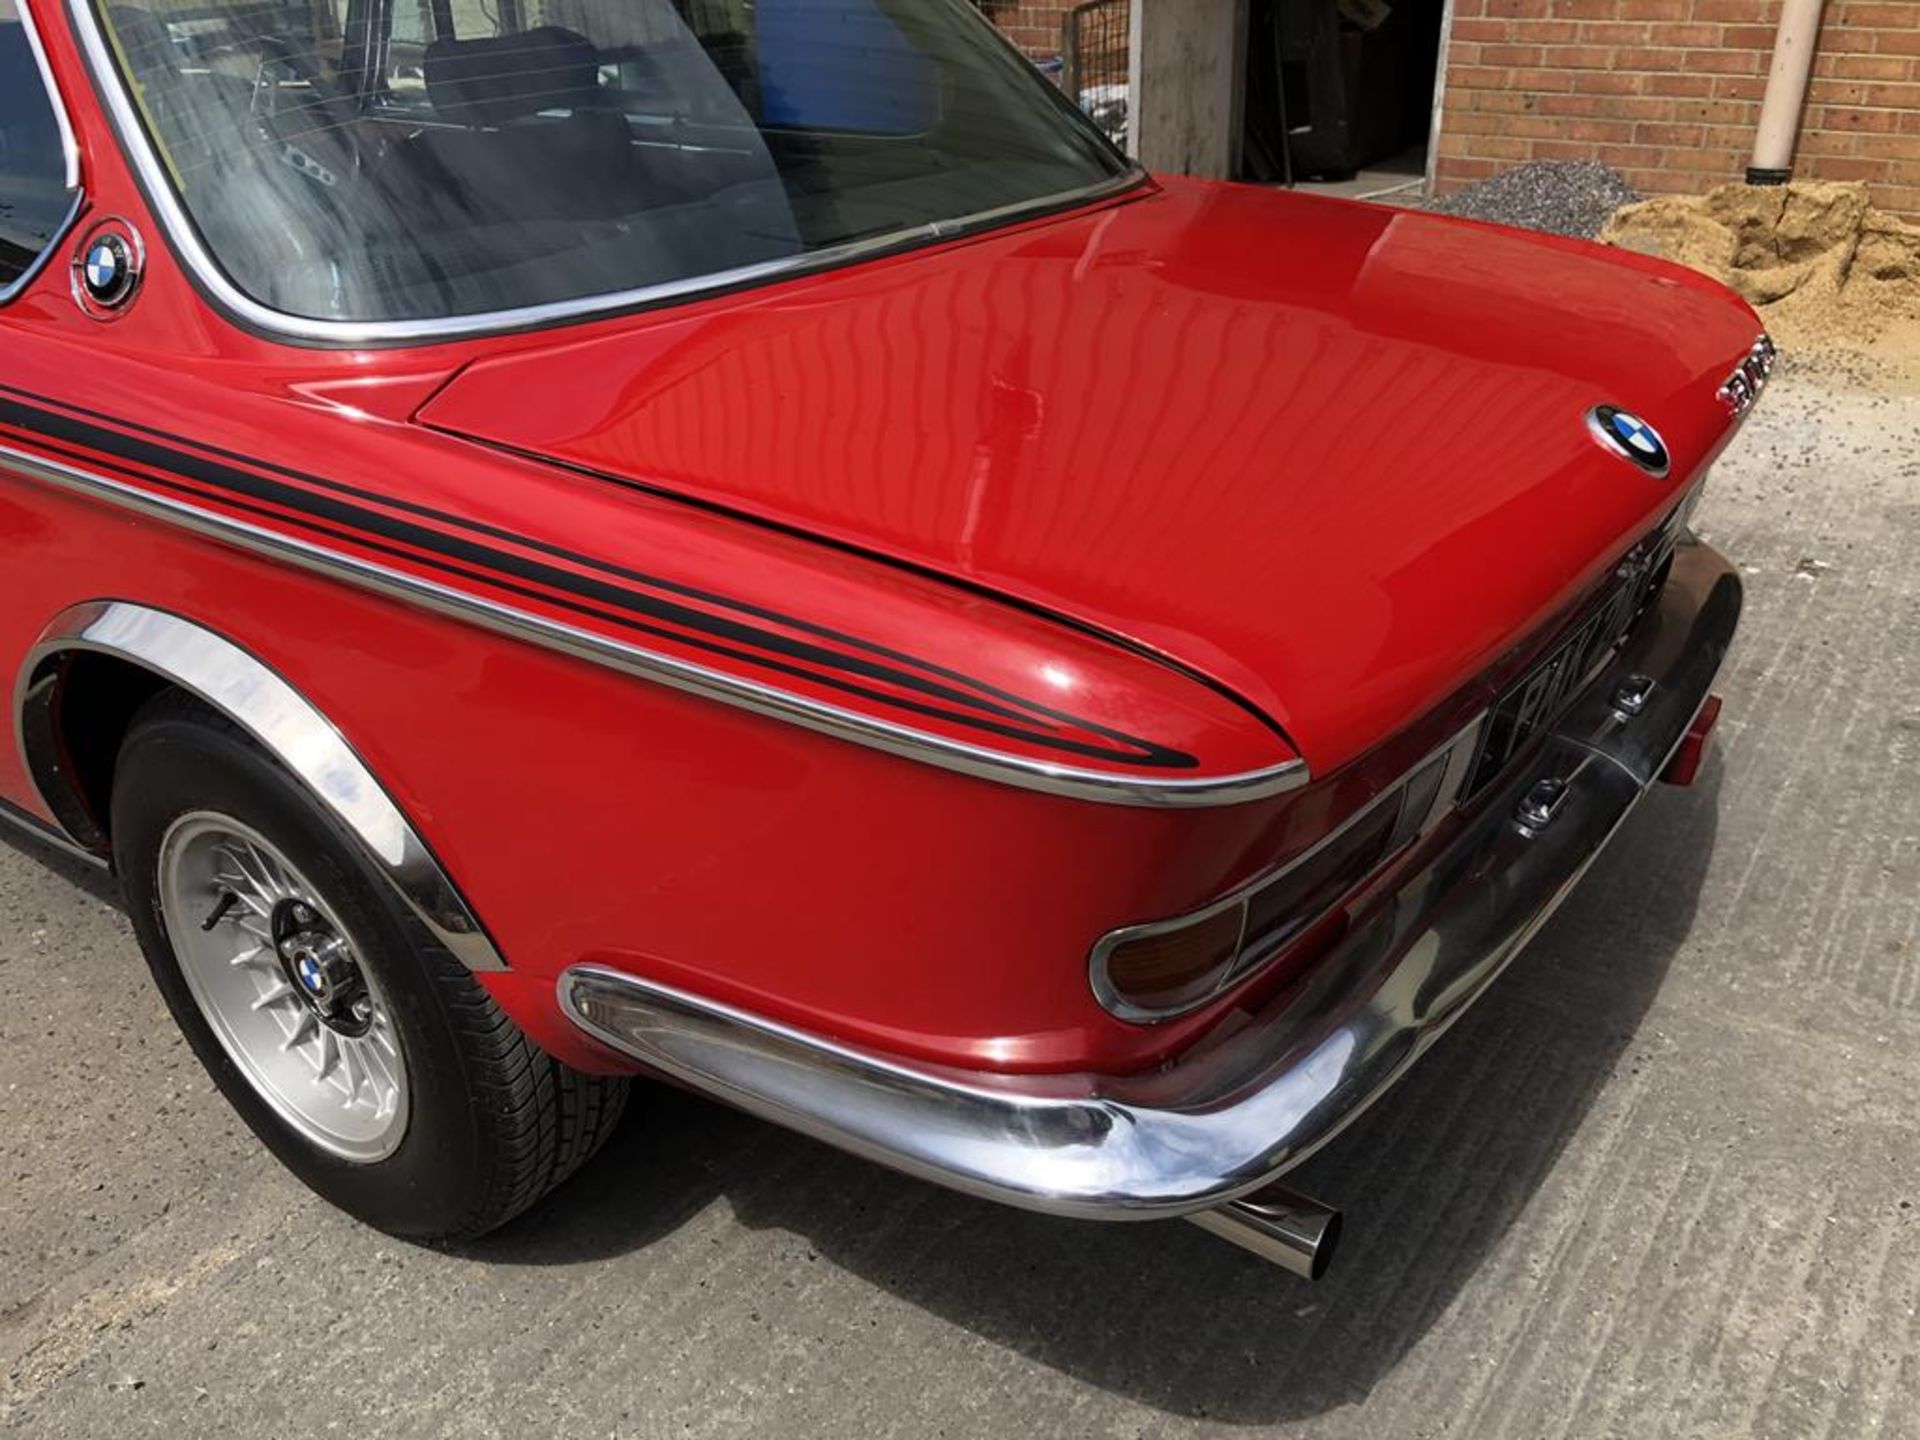 1974 BMW 3.0 CSL Registration number PAK 2M Chassis number 2285402 Verona red with a black - Image 67 of 137